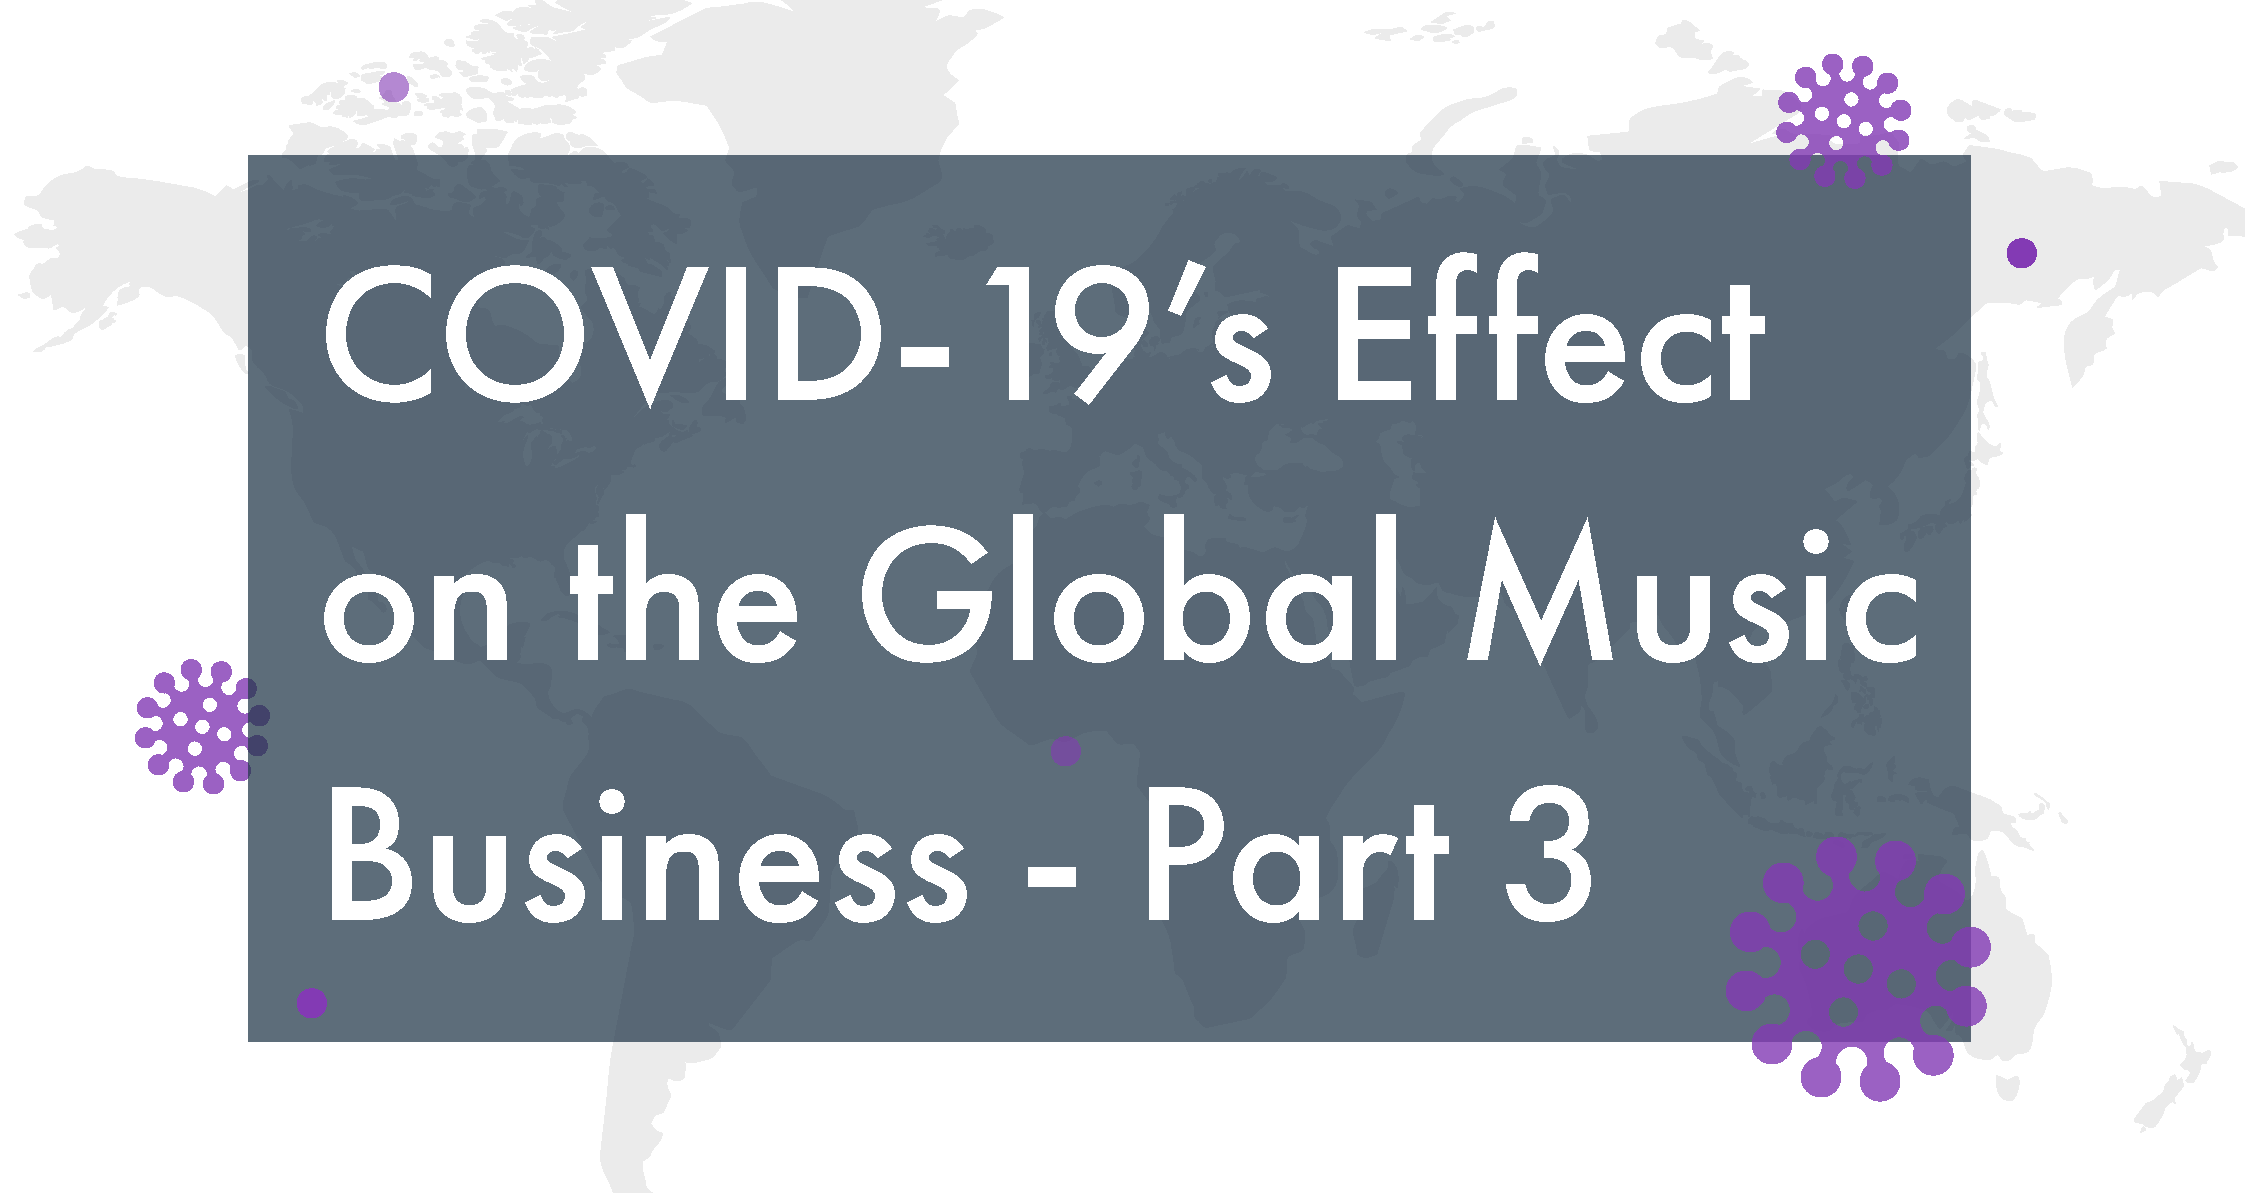 COVID-19’s Effect on the Global Music Business, Part 3: Live Streaming Artists